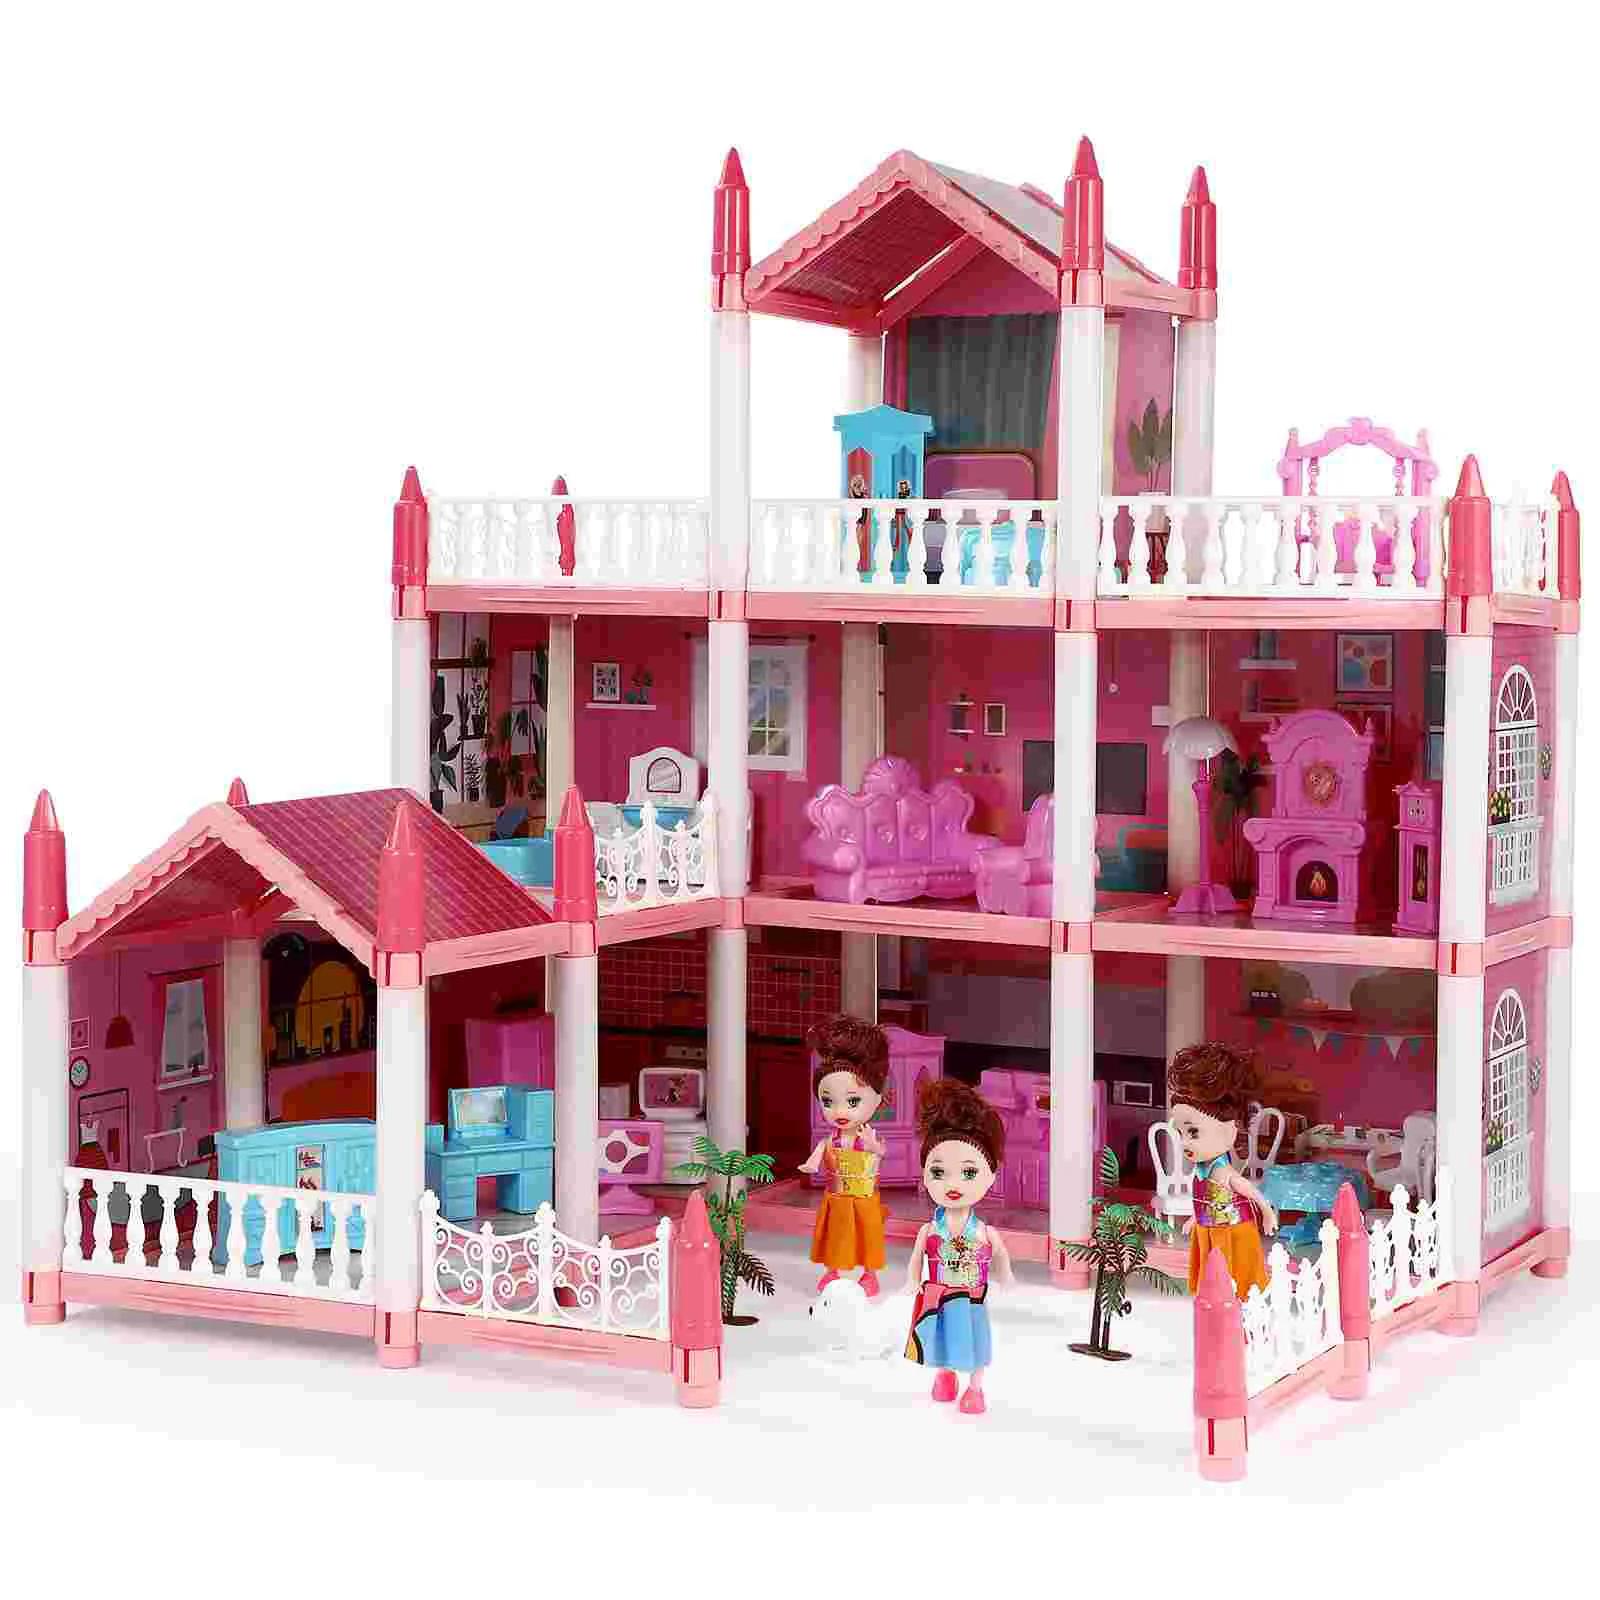 Girl Children's Play House Toy Girl's Imitation 9 Rooms Pink Princess Toys Pp With 3 Stories monorail stories pc